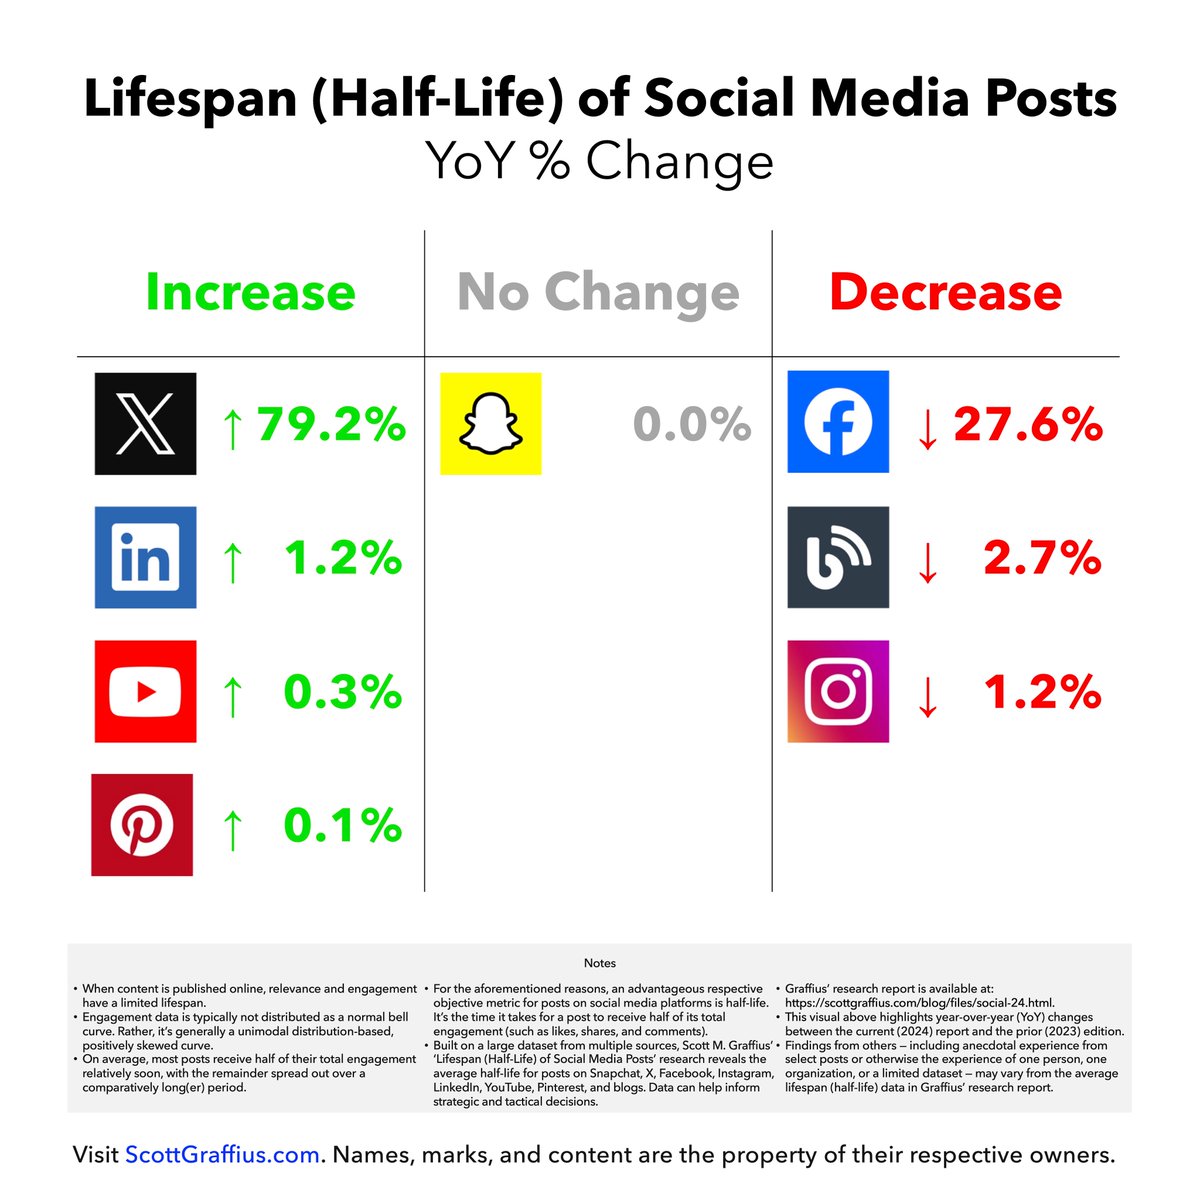 The visual highlights the 2022/2023 year over year % changes to the average lifespan (half-life) of posts on Snapchat, X, Facebook, Instagram, LinkedIn, YouTube, Pinterest, and blogs. Full report 👉 scottgraffius.com/blog/files/soc….